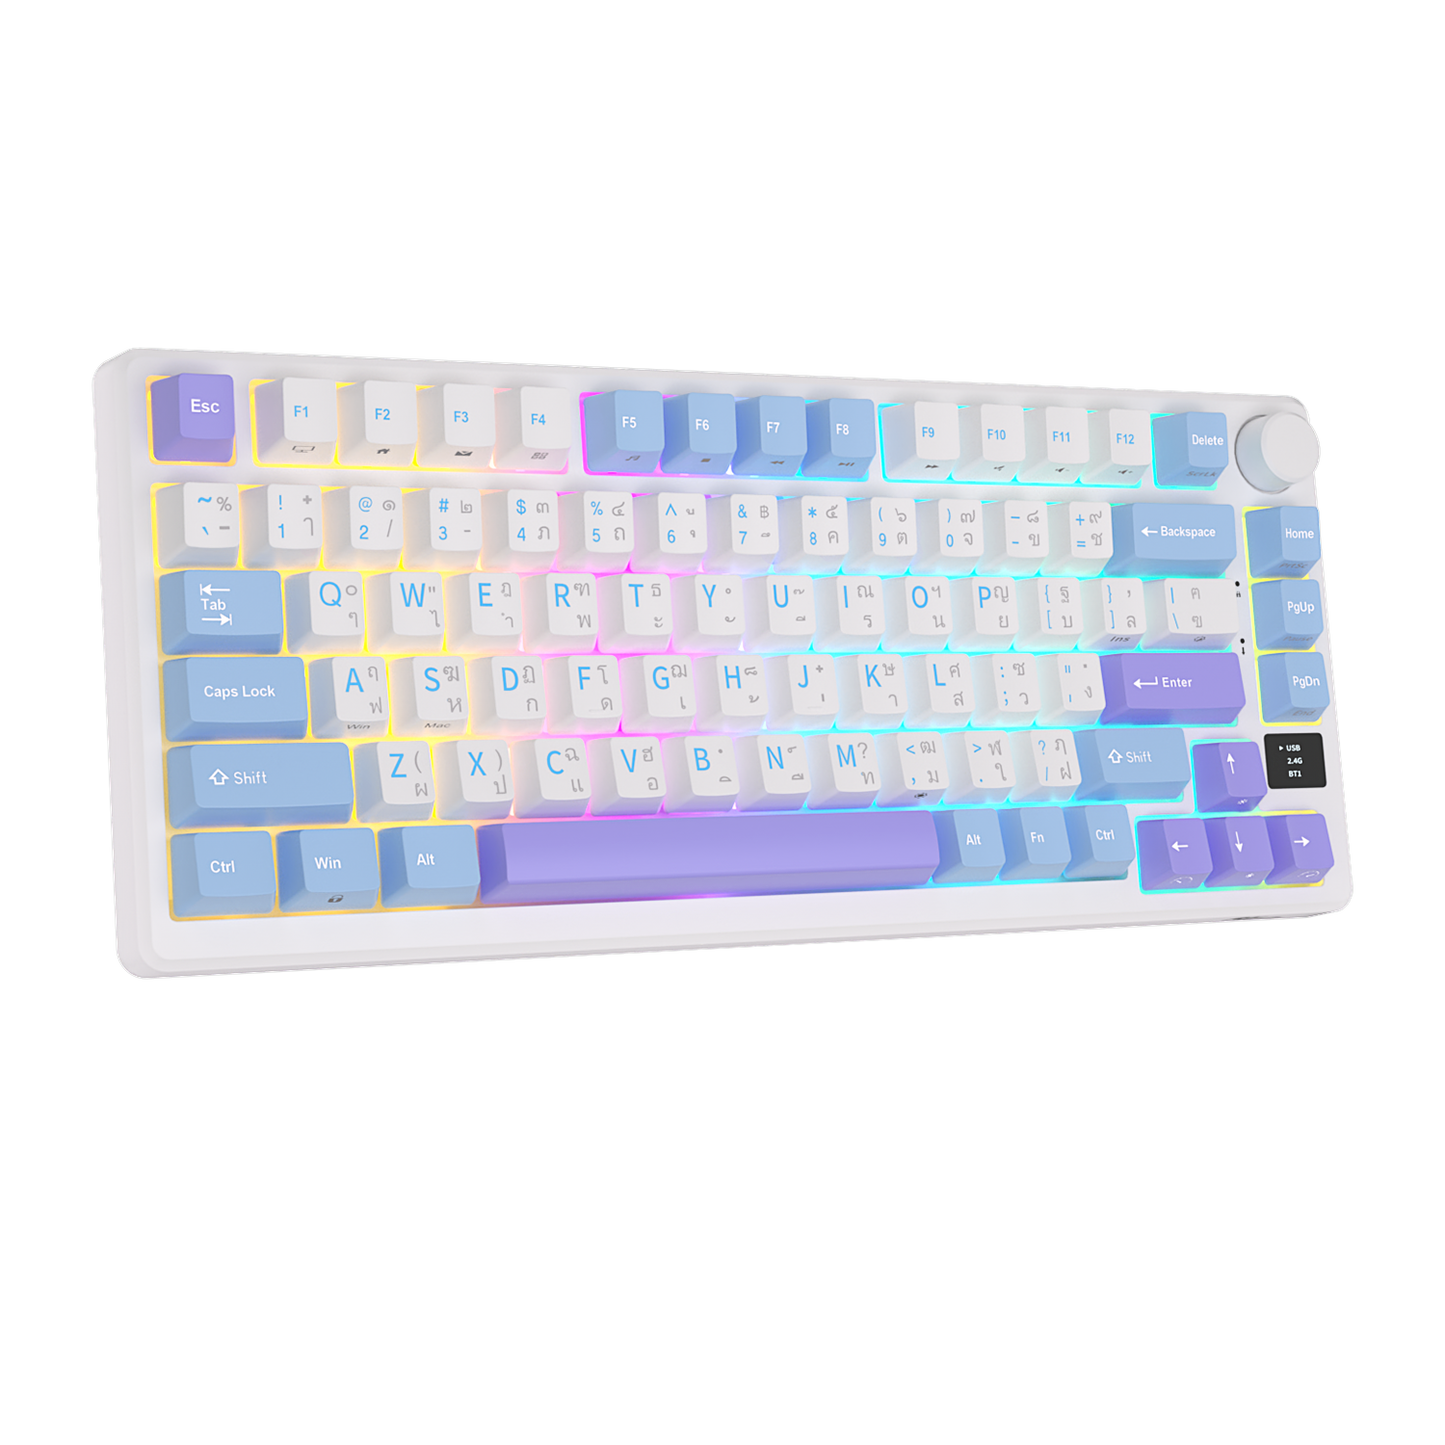 Royal Kludge M75 (RKM75) Taro Milk upright, all keys visible, neon yellow, pink and blue backlight and pastel blue, lavender and white keys. 